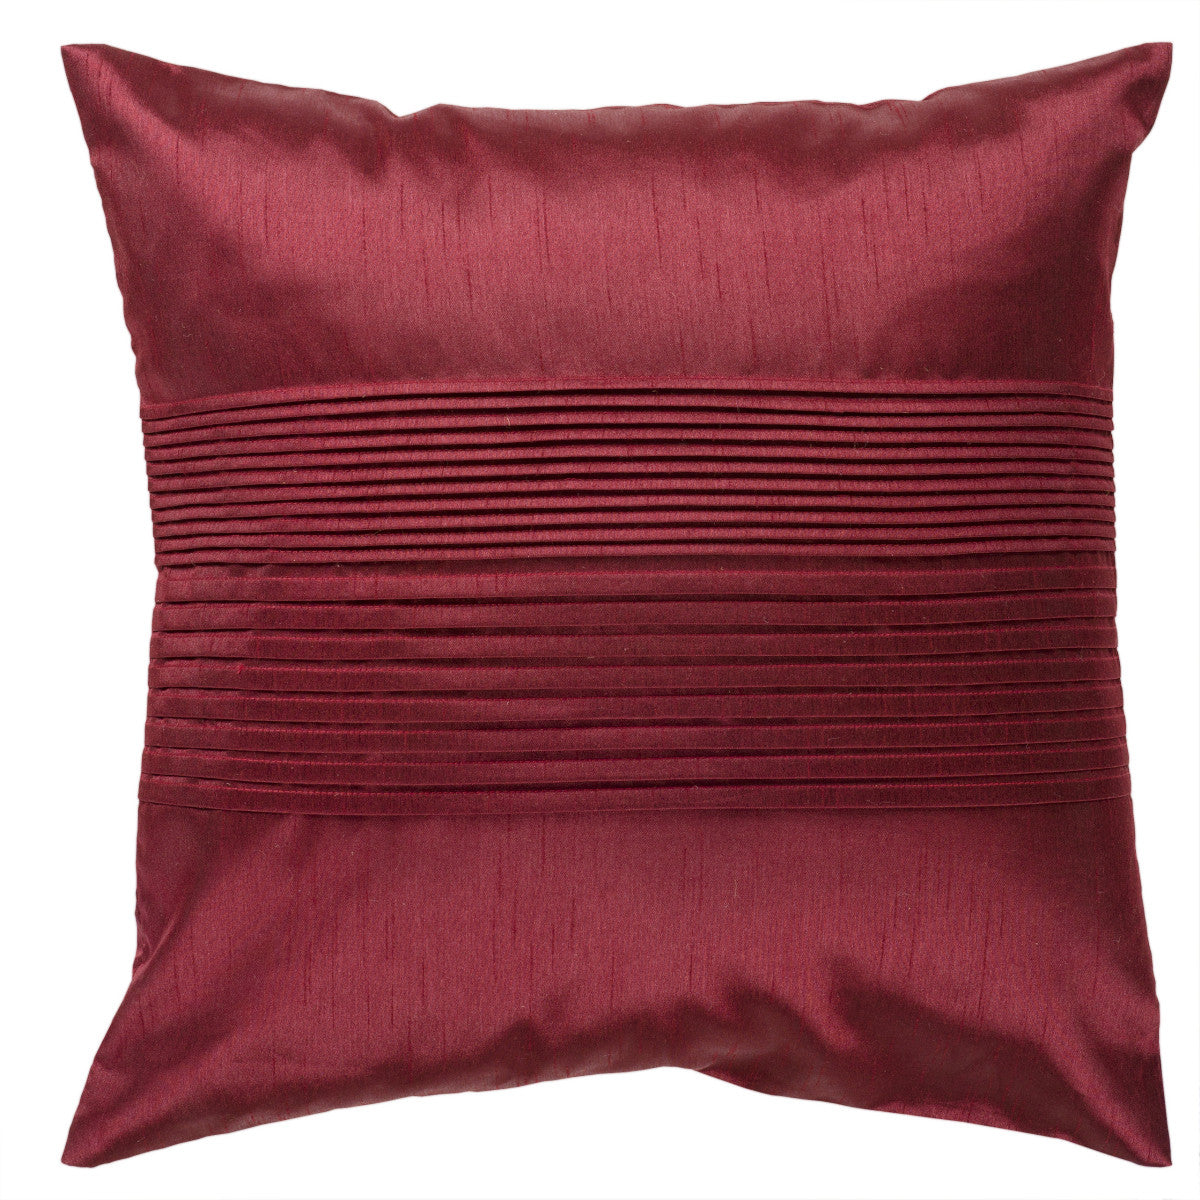 Surya Solid Pleated Lori Lee HH-026 Pillow